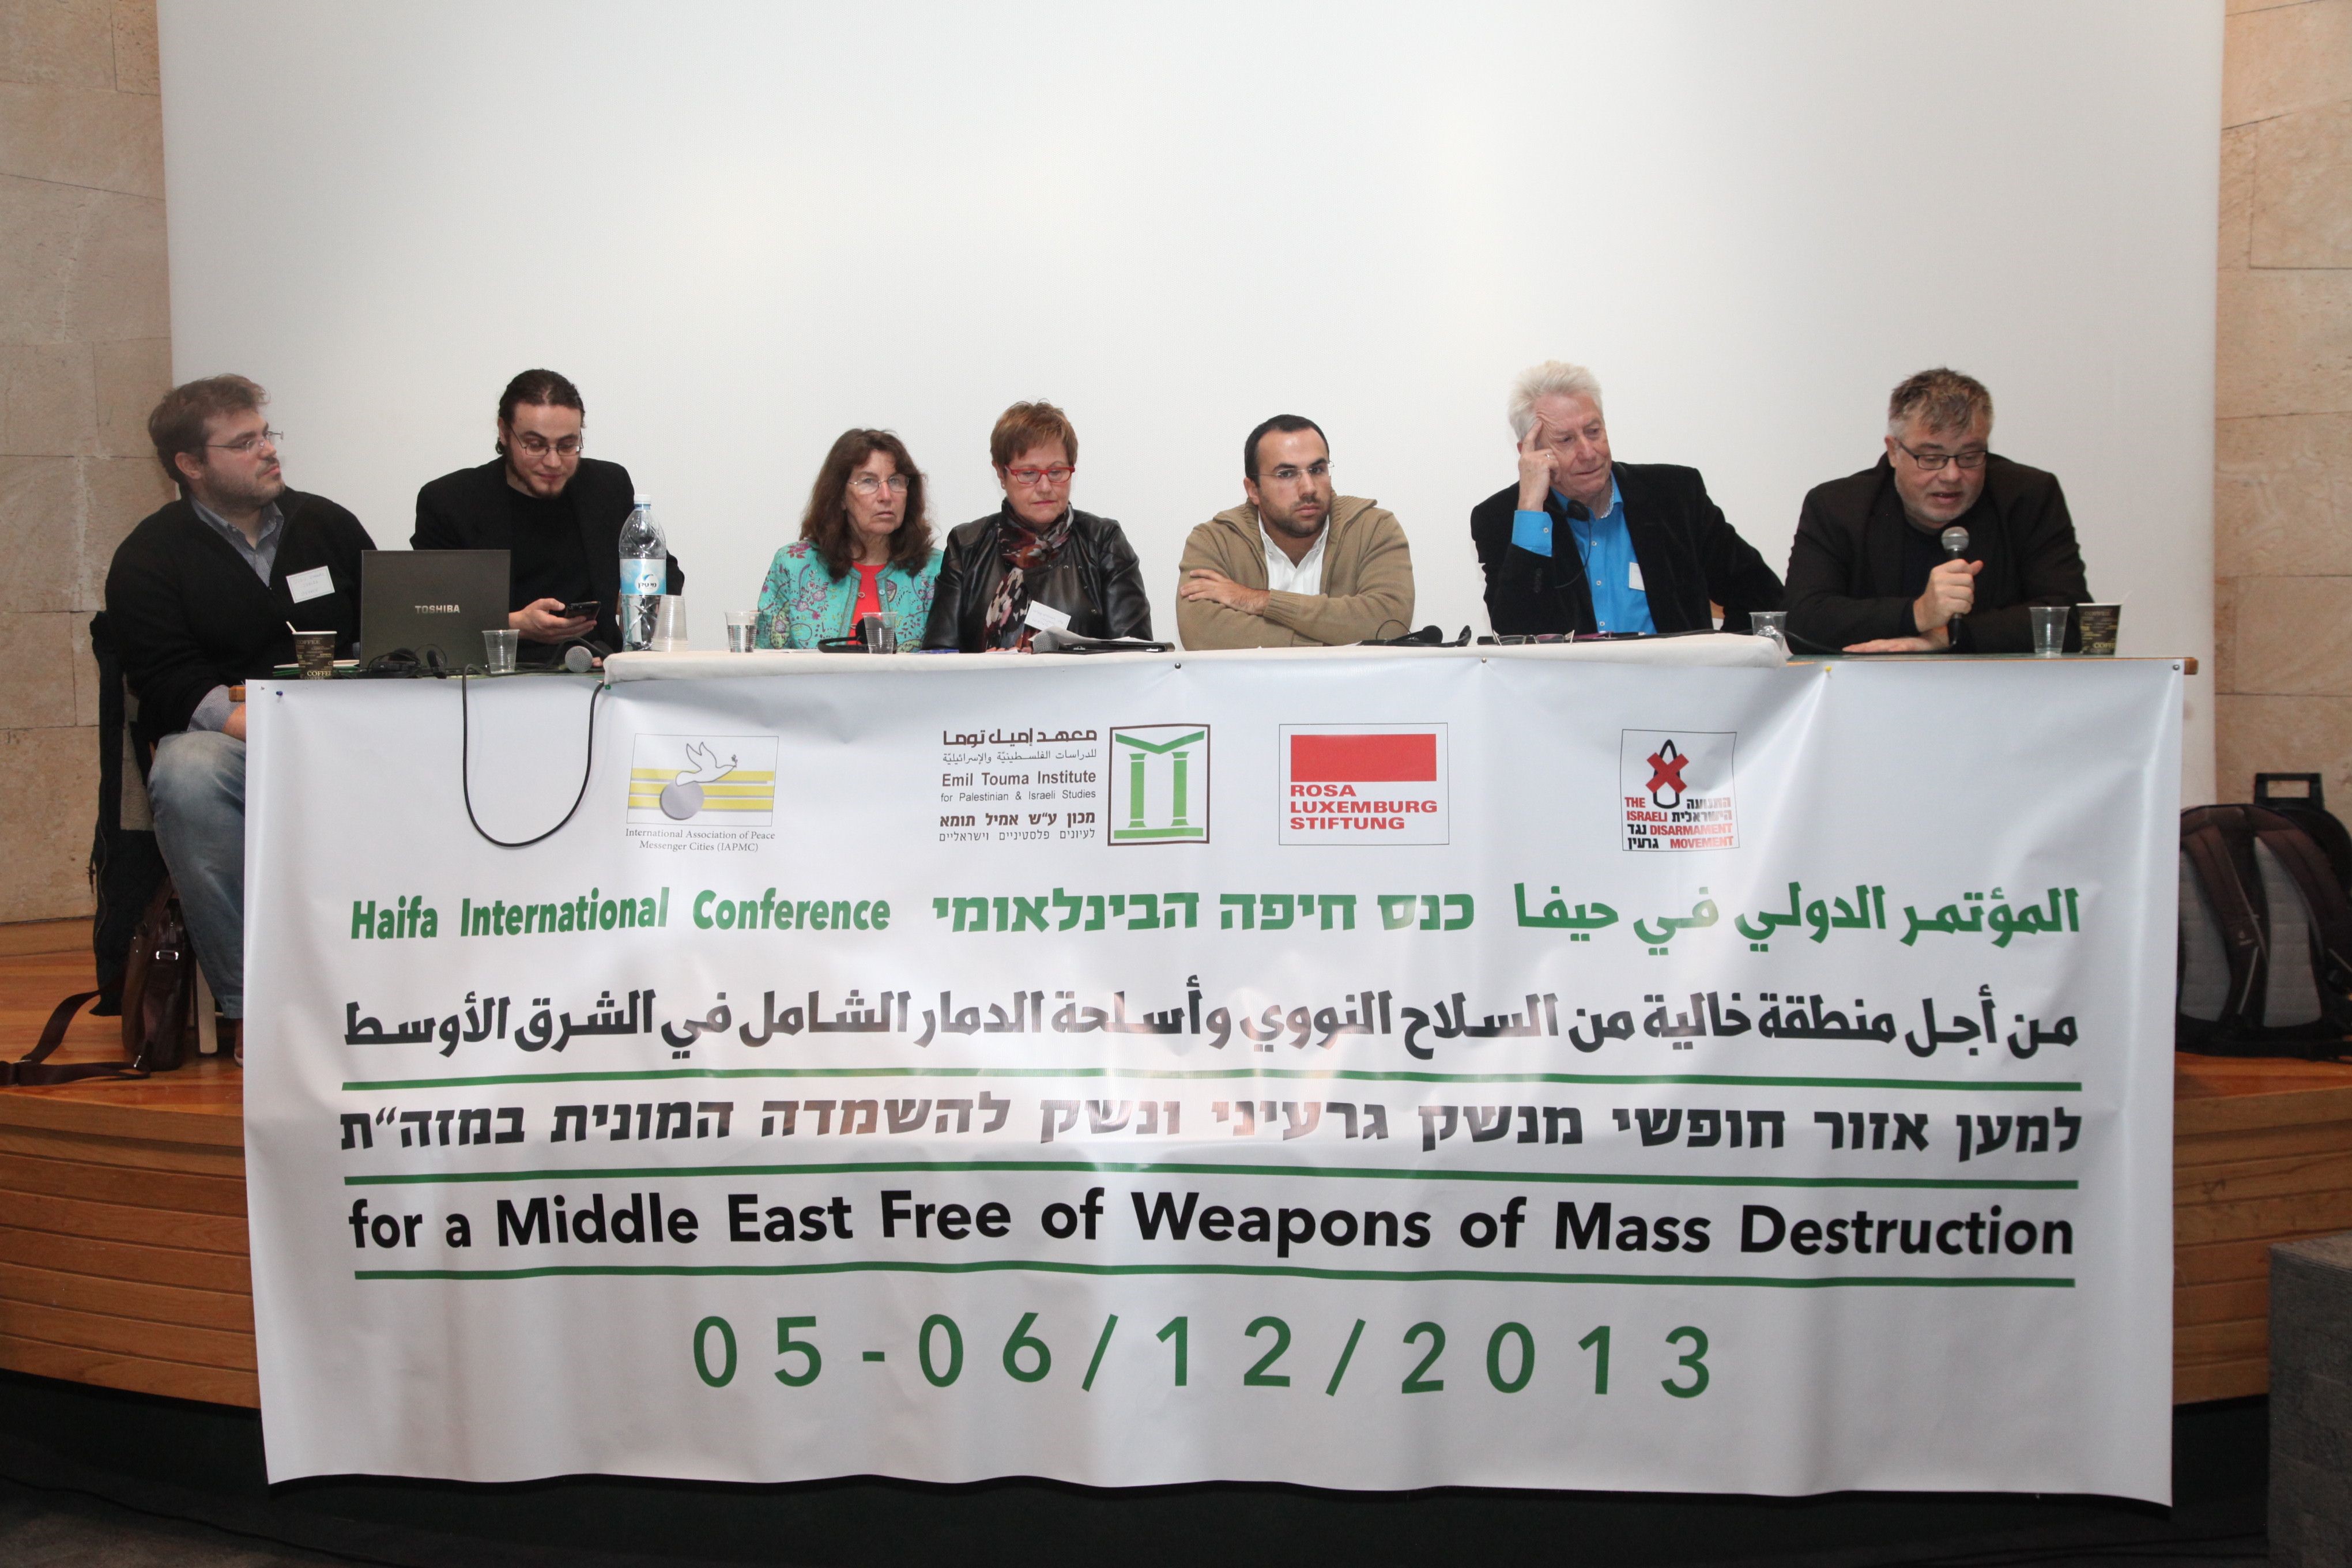 A workshop during the Conference for a Nuclear Weapons and Weapons of Mass Destruction Free Zone in the Middle East held in Haifa, Israel, on 5 and 6 December 2013 (Photo: The Israel Office of the Rosa Luxemburg Stiftung)